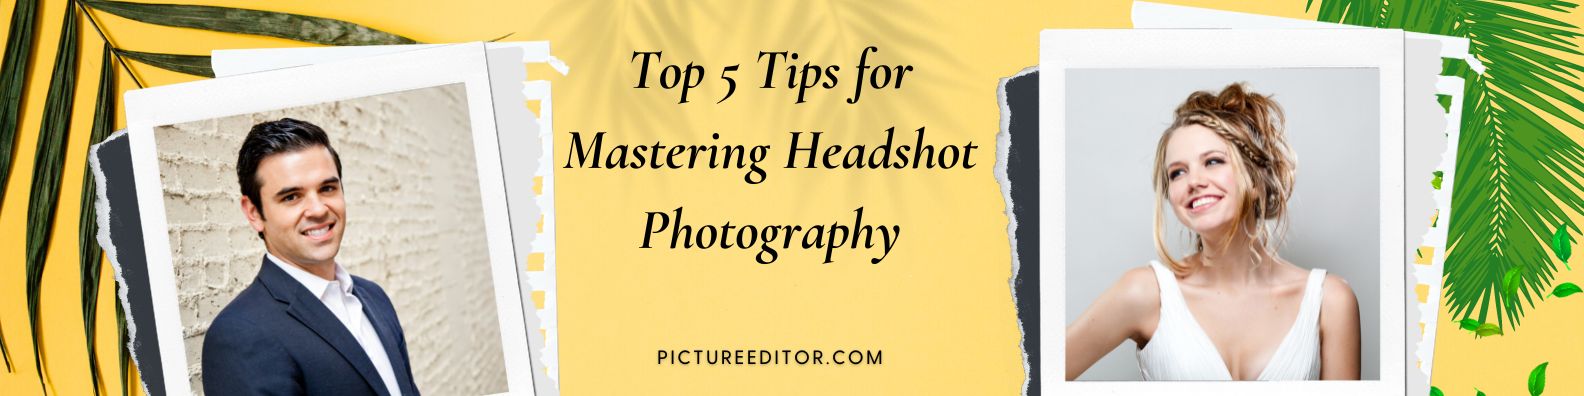 Top 5 Tips for Mastering Headshot Photography